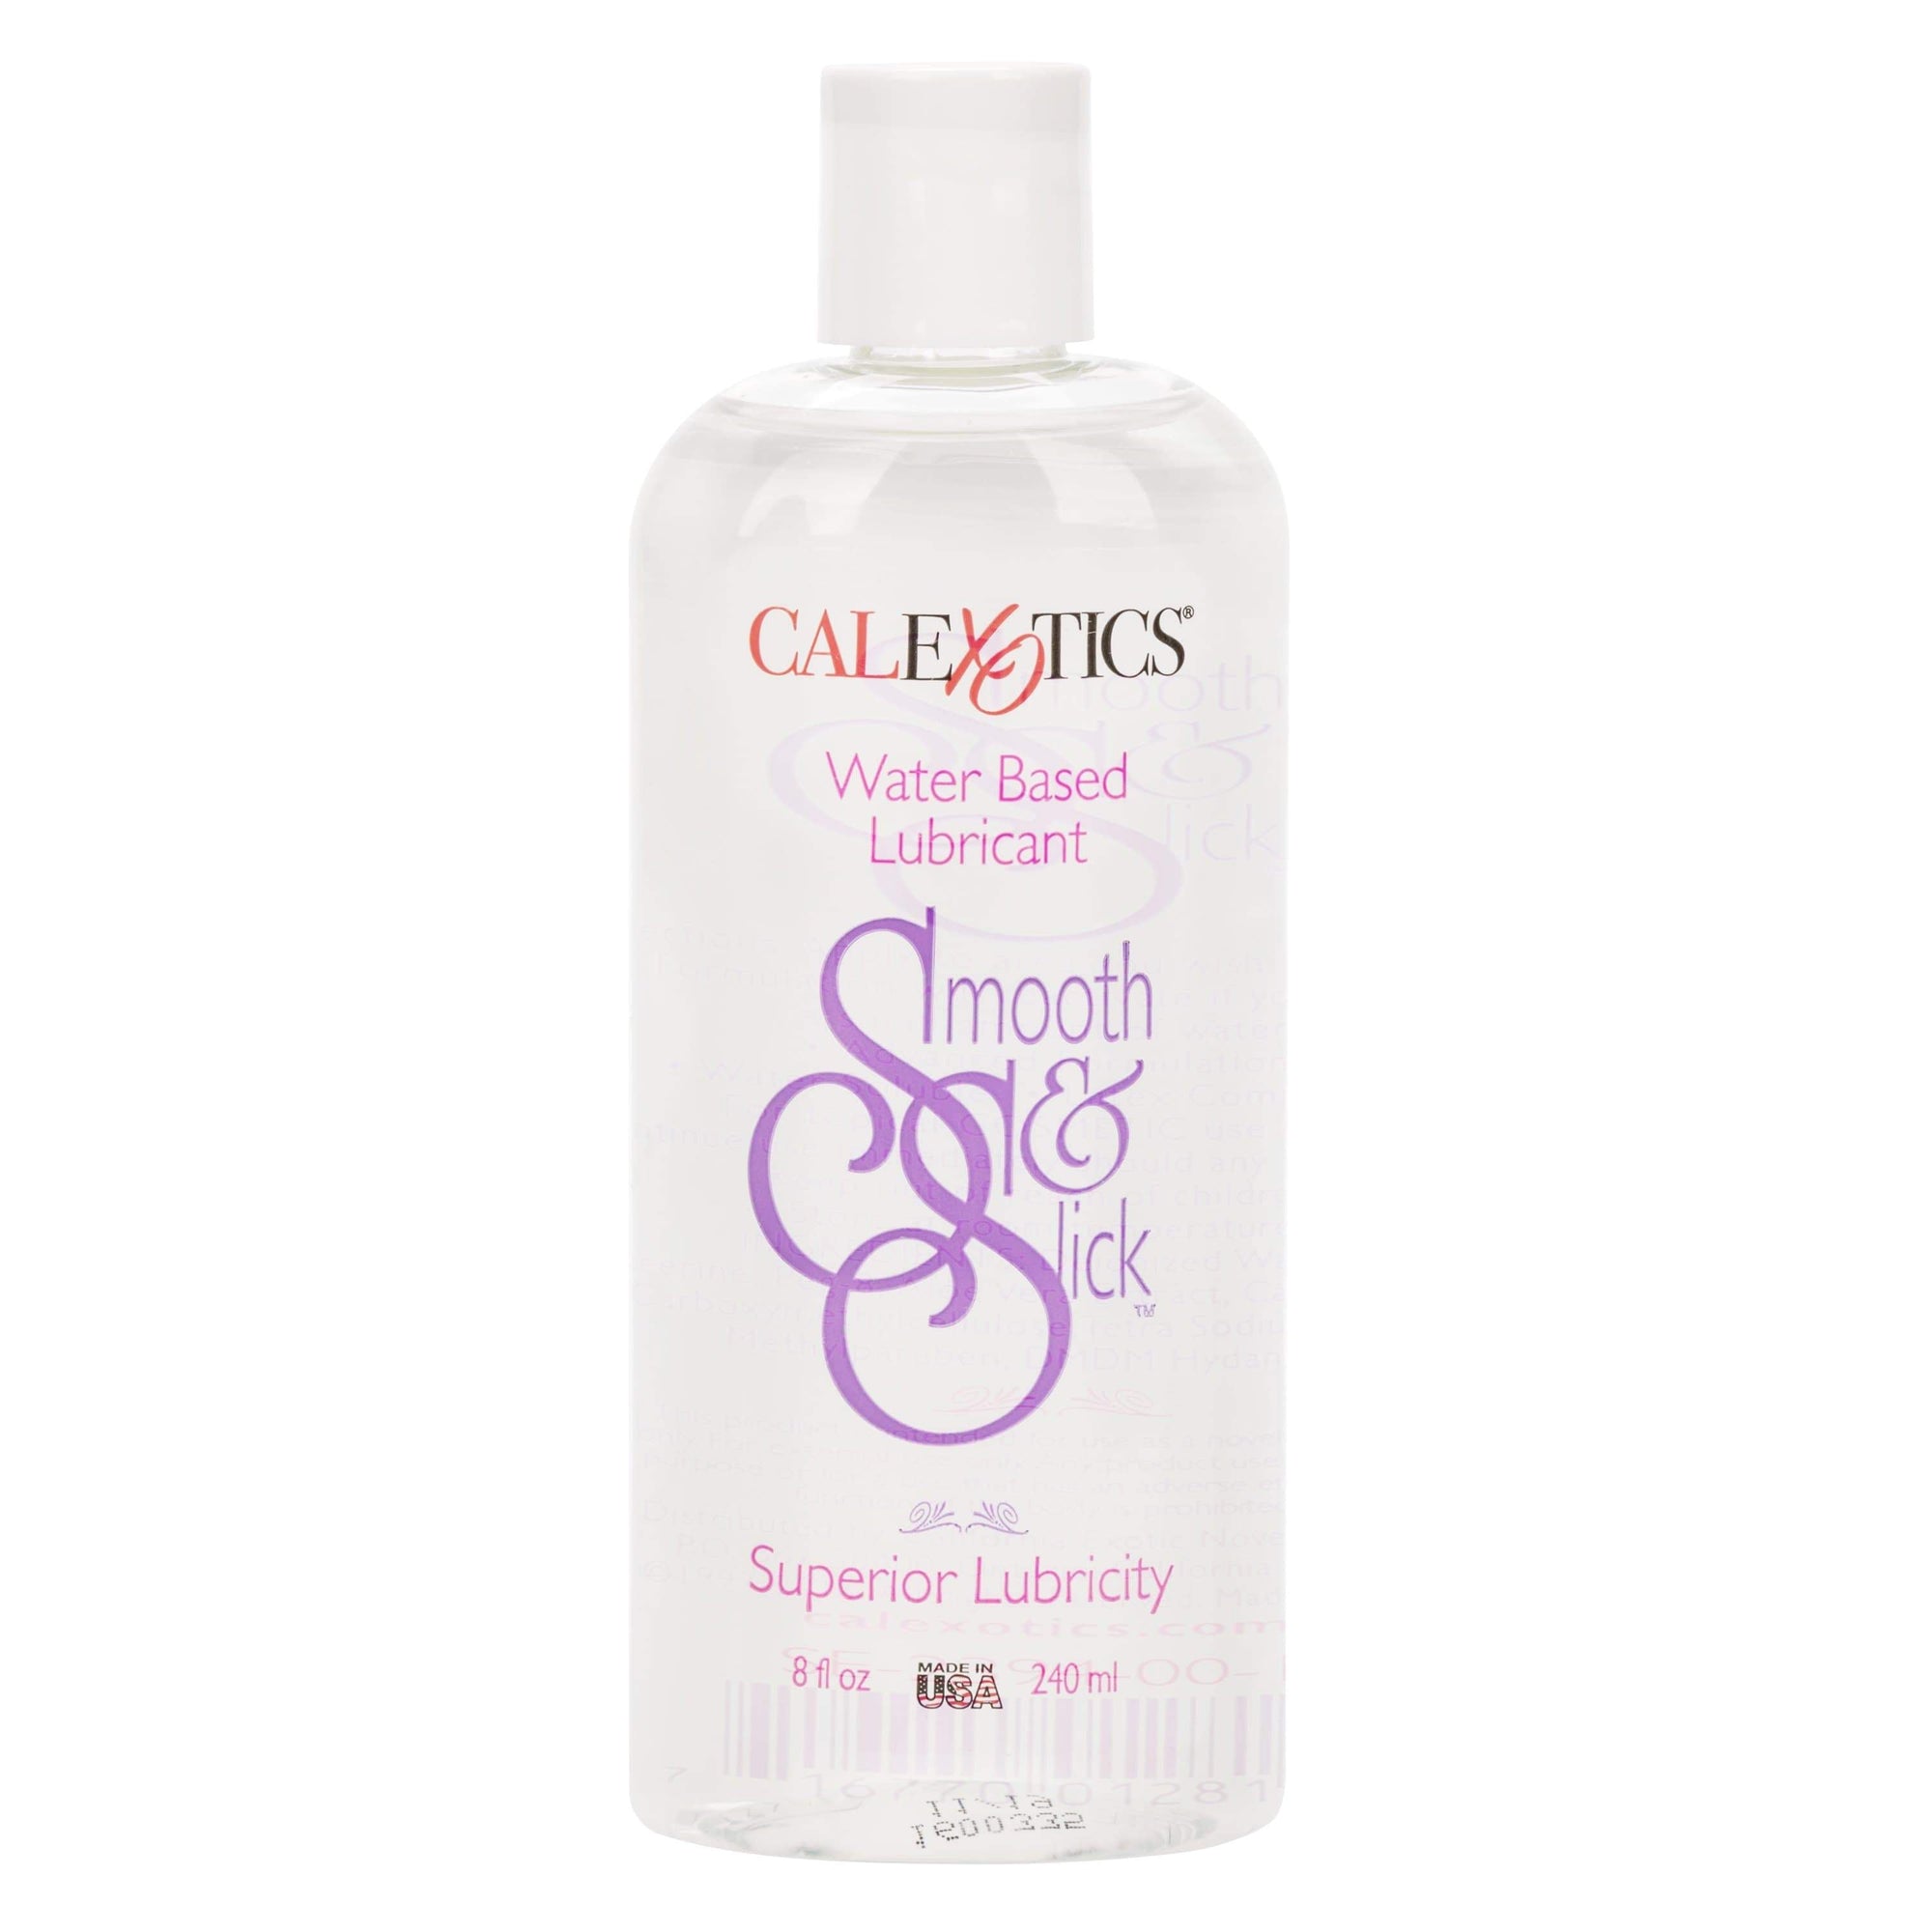 California Exotics - Smooth and Slick Water Based Lubricant 240ml -  Lube (Water Based)  Durio.sg